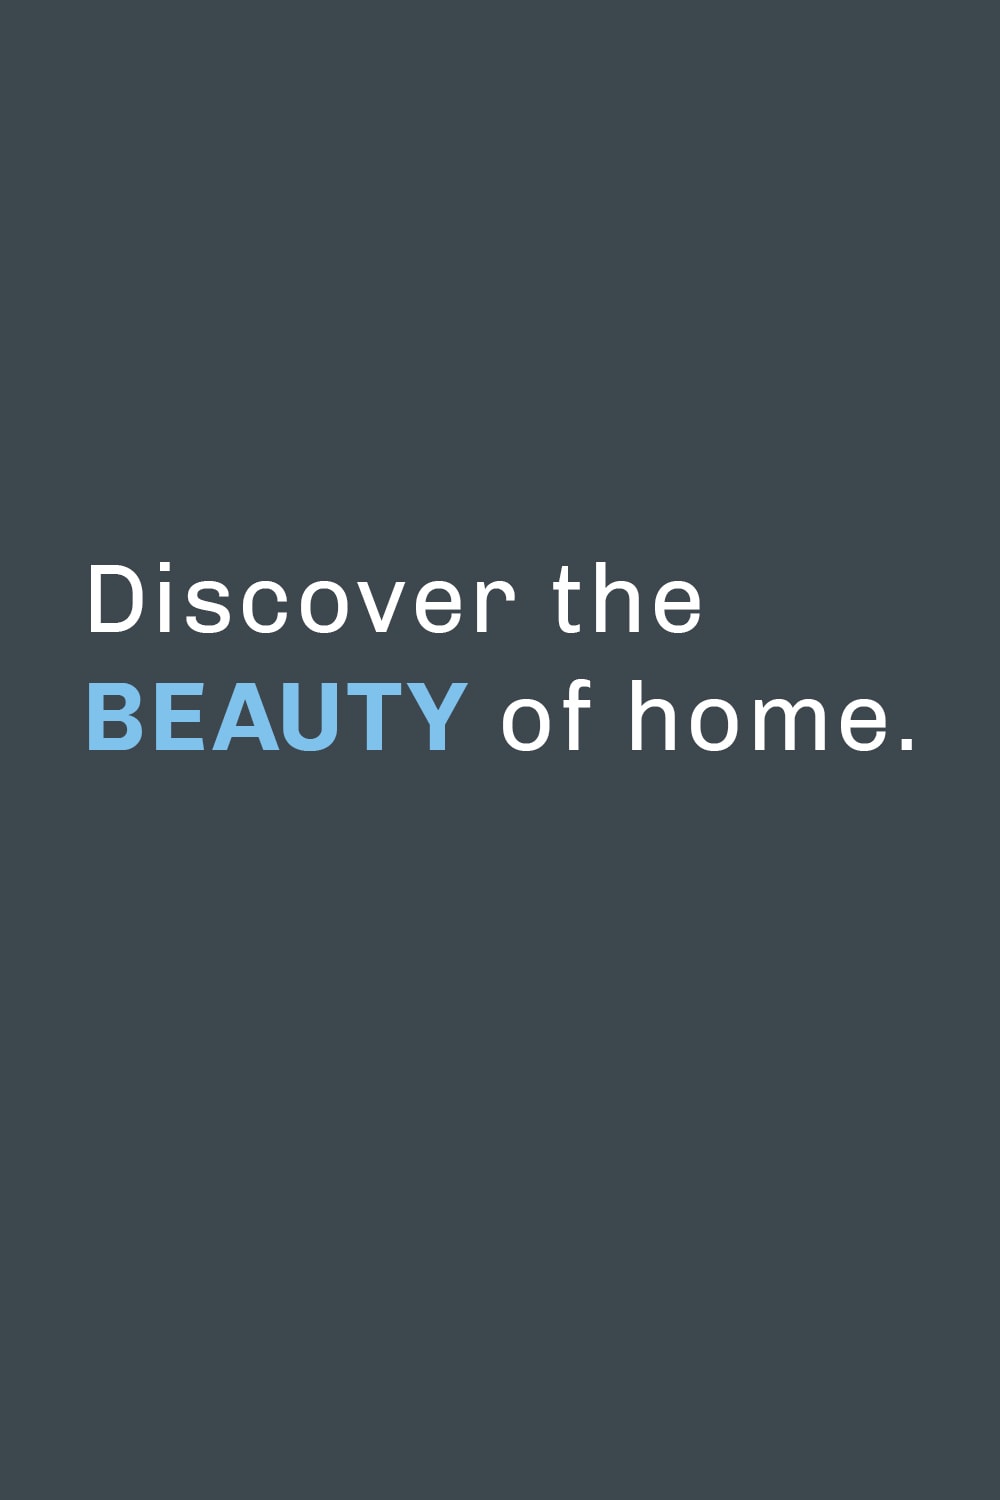 Discover the beauty of home